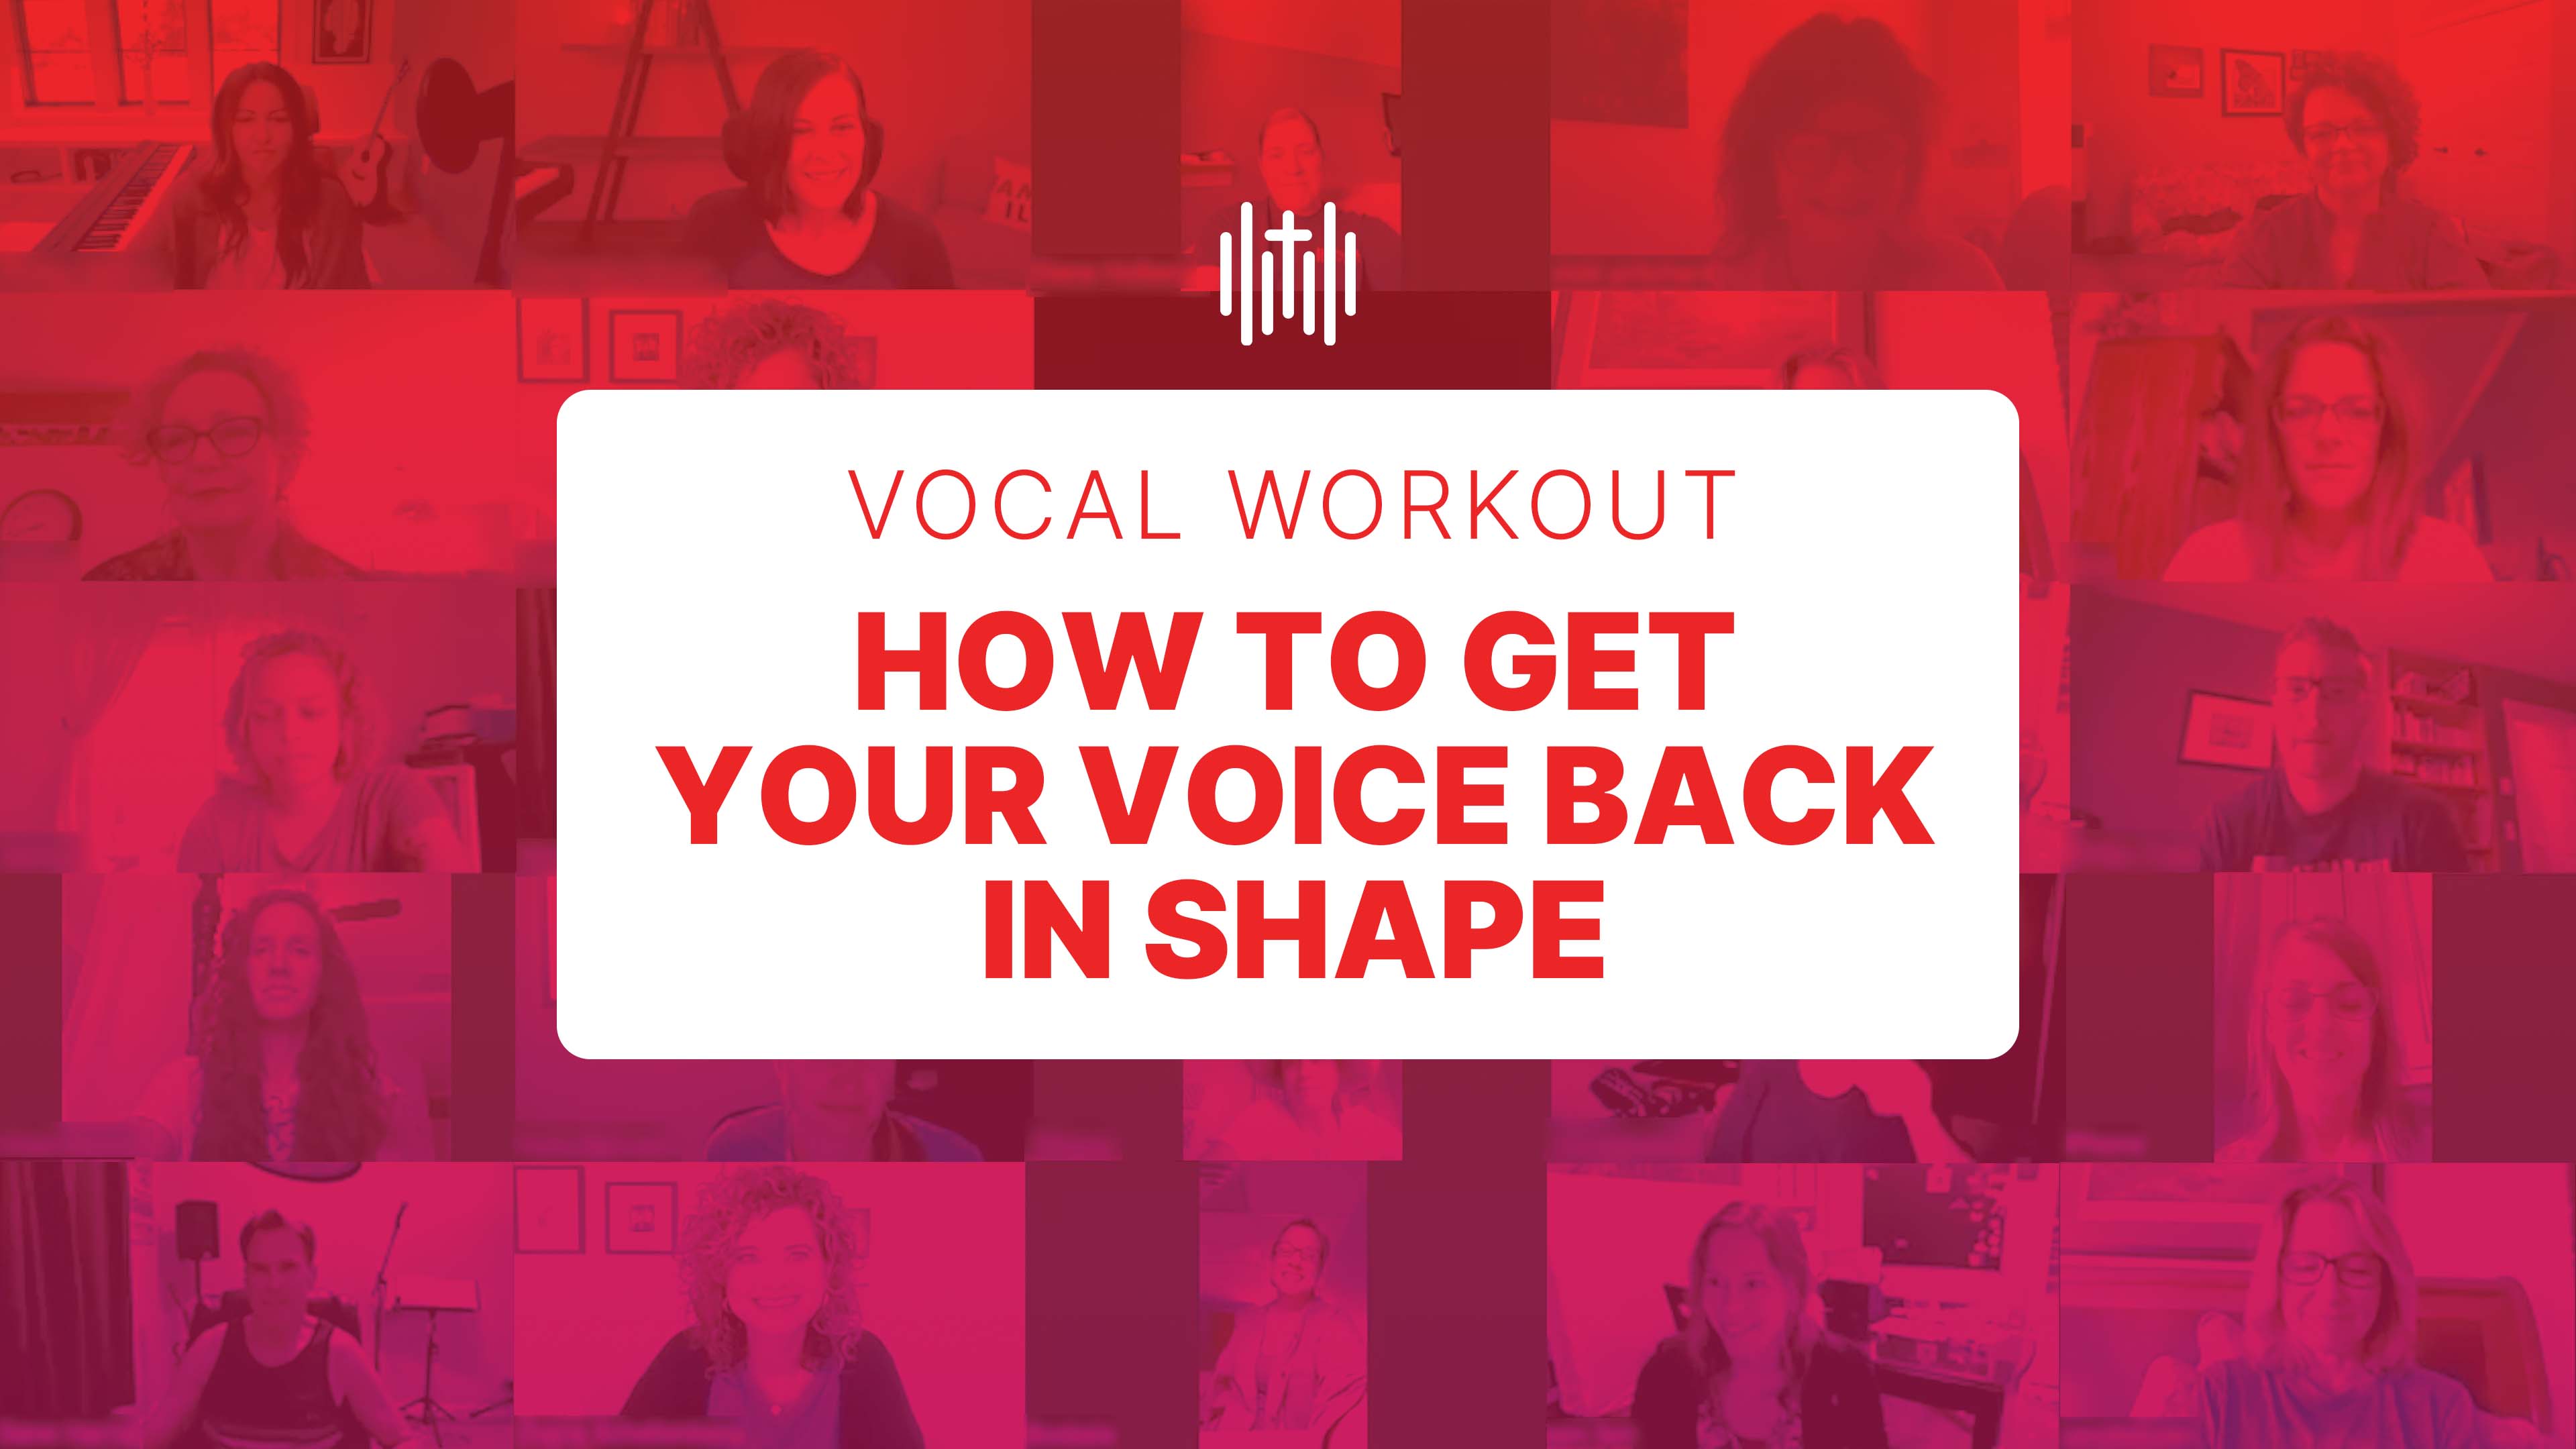 Vocal Workout - How to Get Your Voice Back in Shape